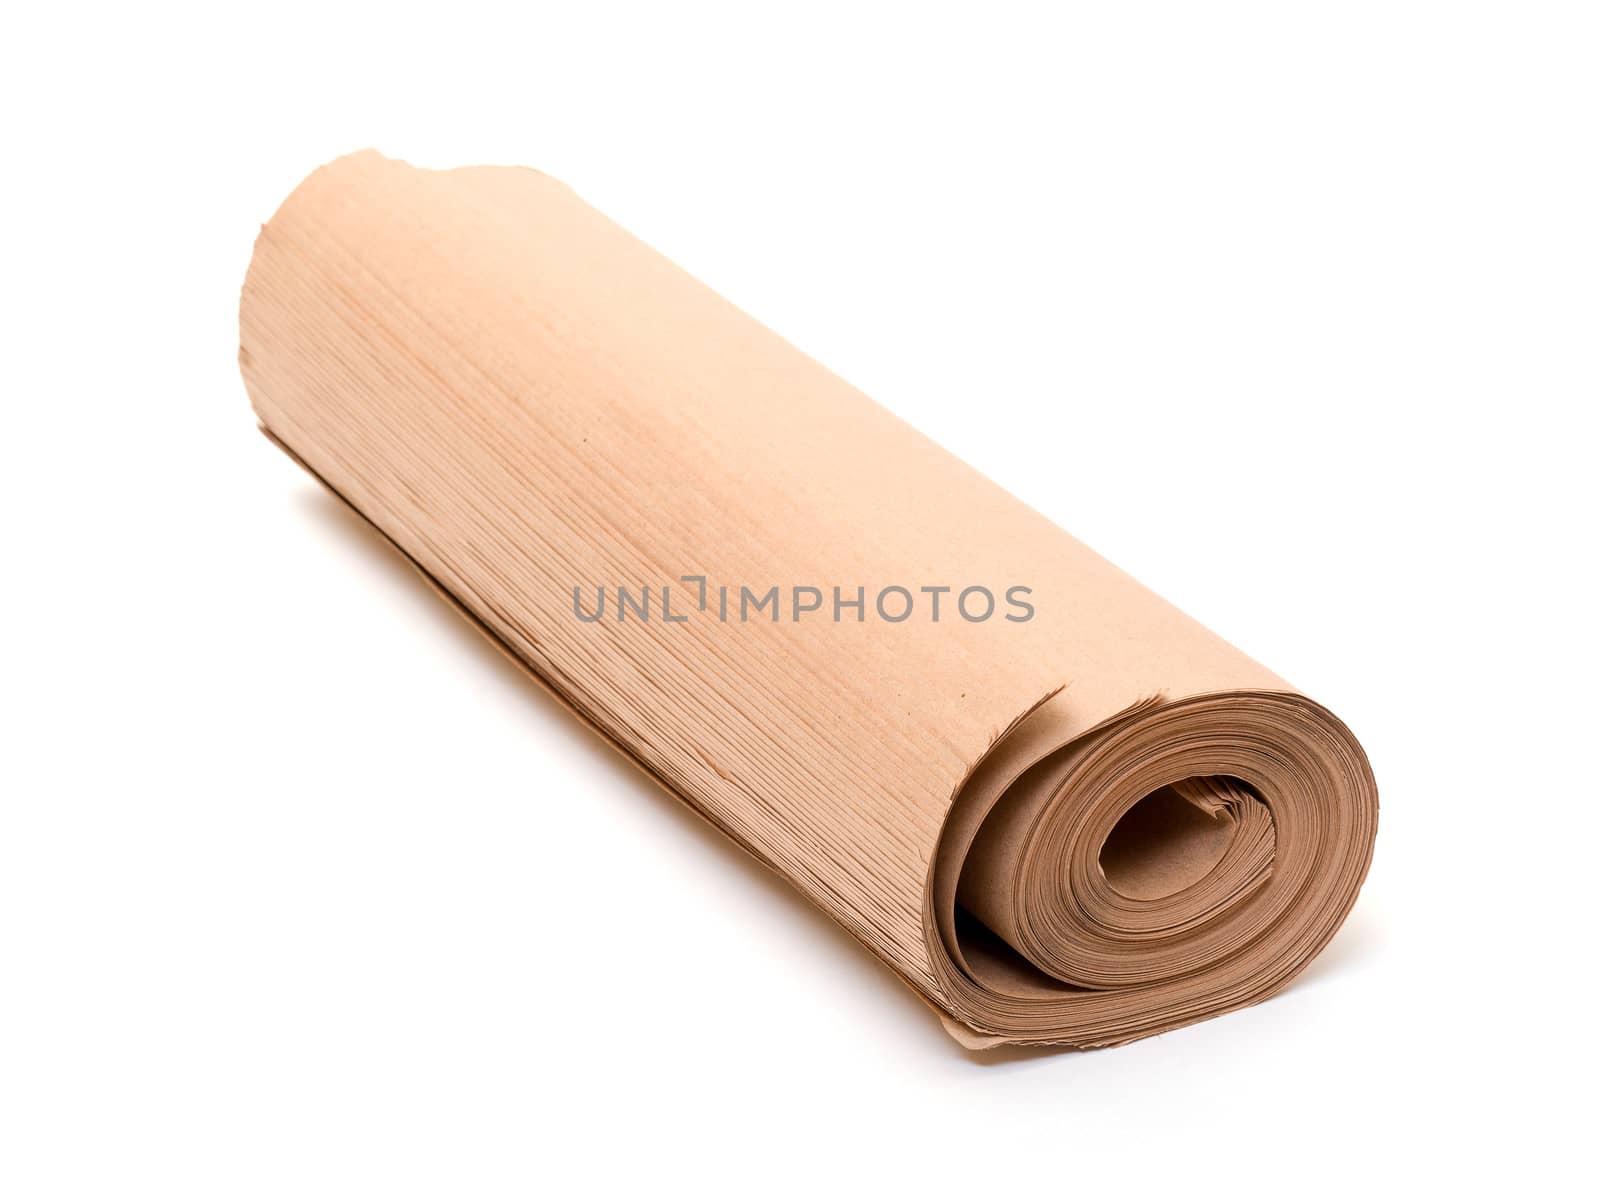 Twisted into roll brown wrapping paper on white background